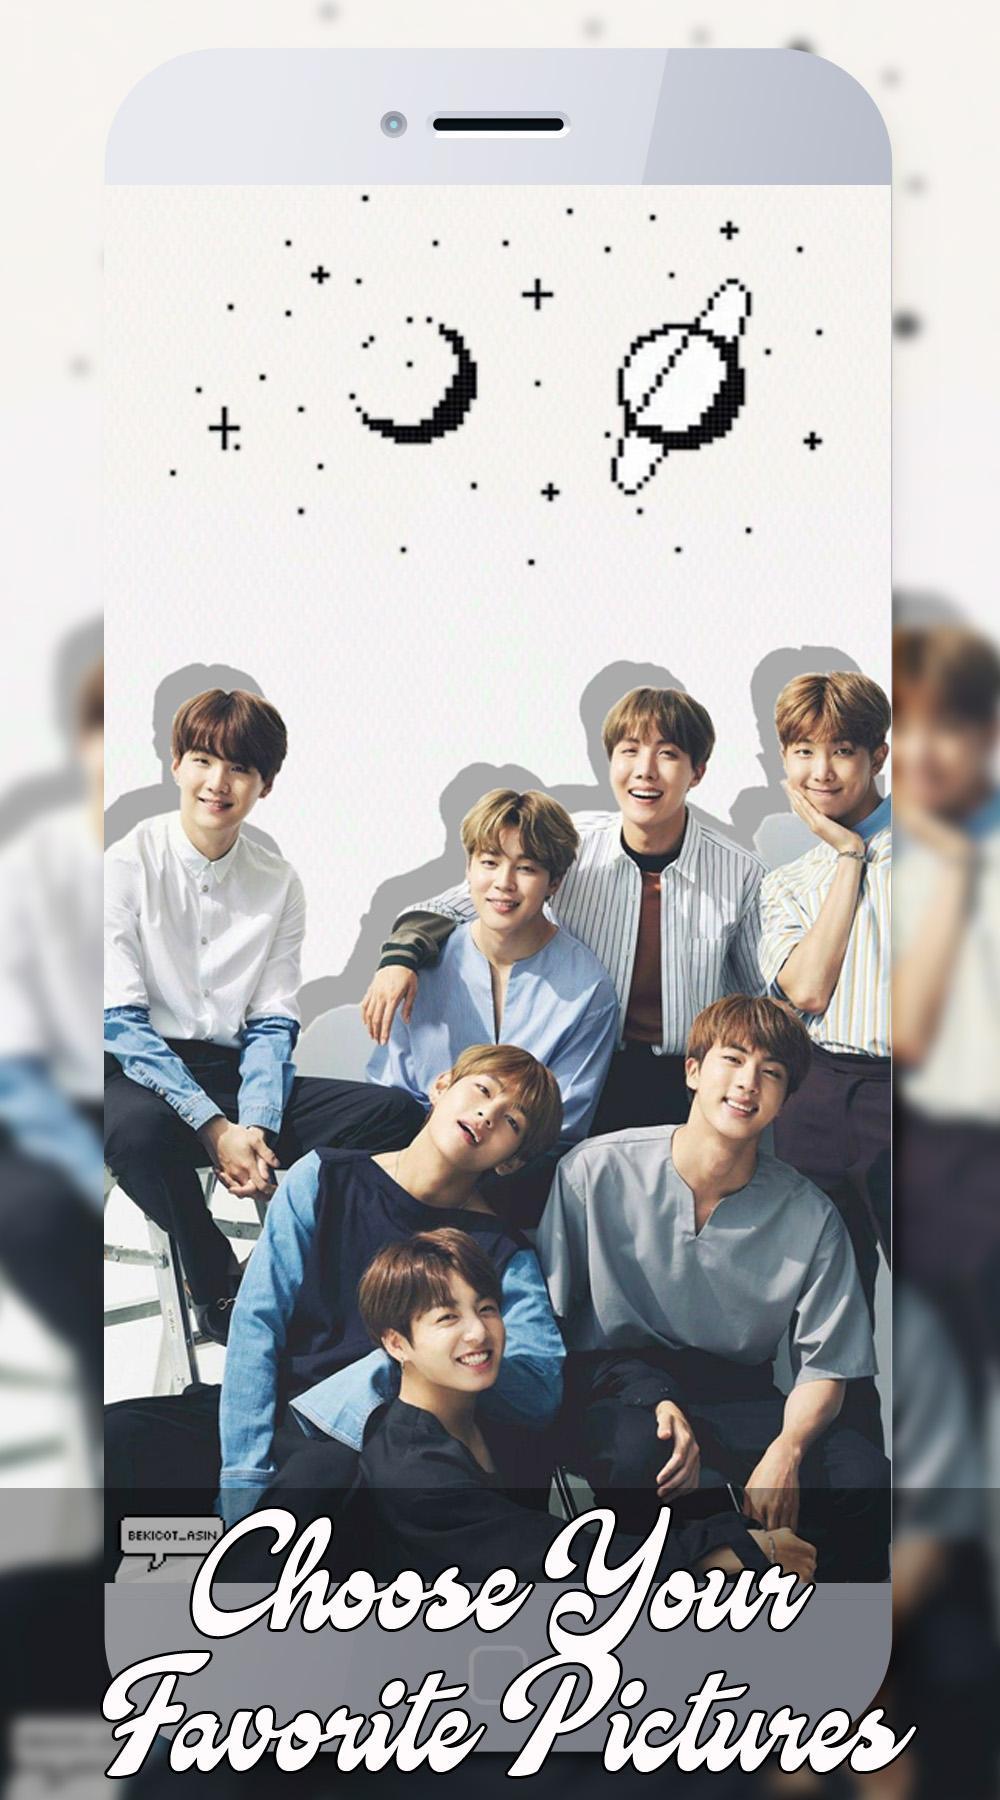 Dance Bts Gif Wallpaper For Android Apk Download